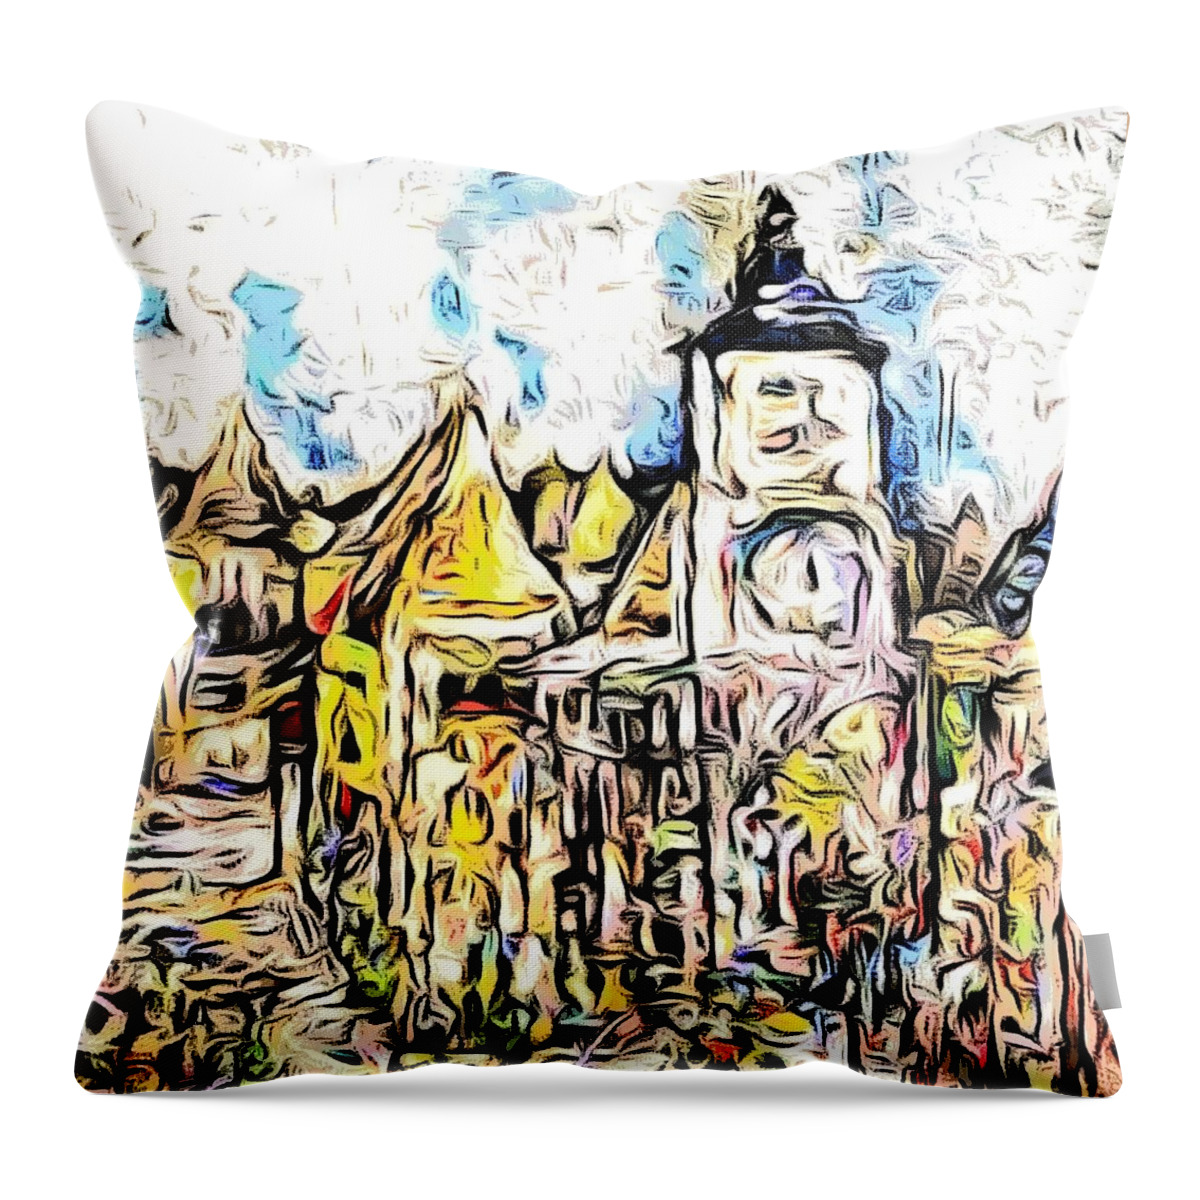 New Orleans Throw Pillow featuring the painting Old Nawlins by Julie TuckerDemps